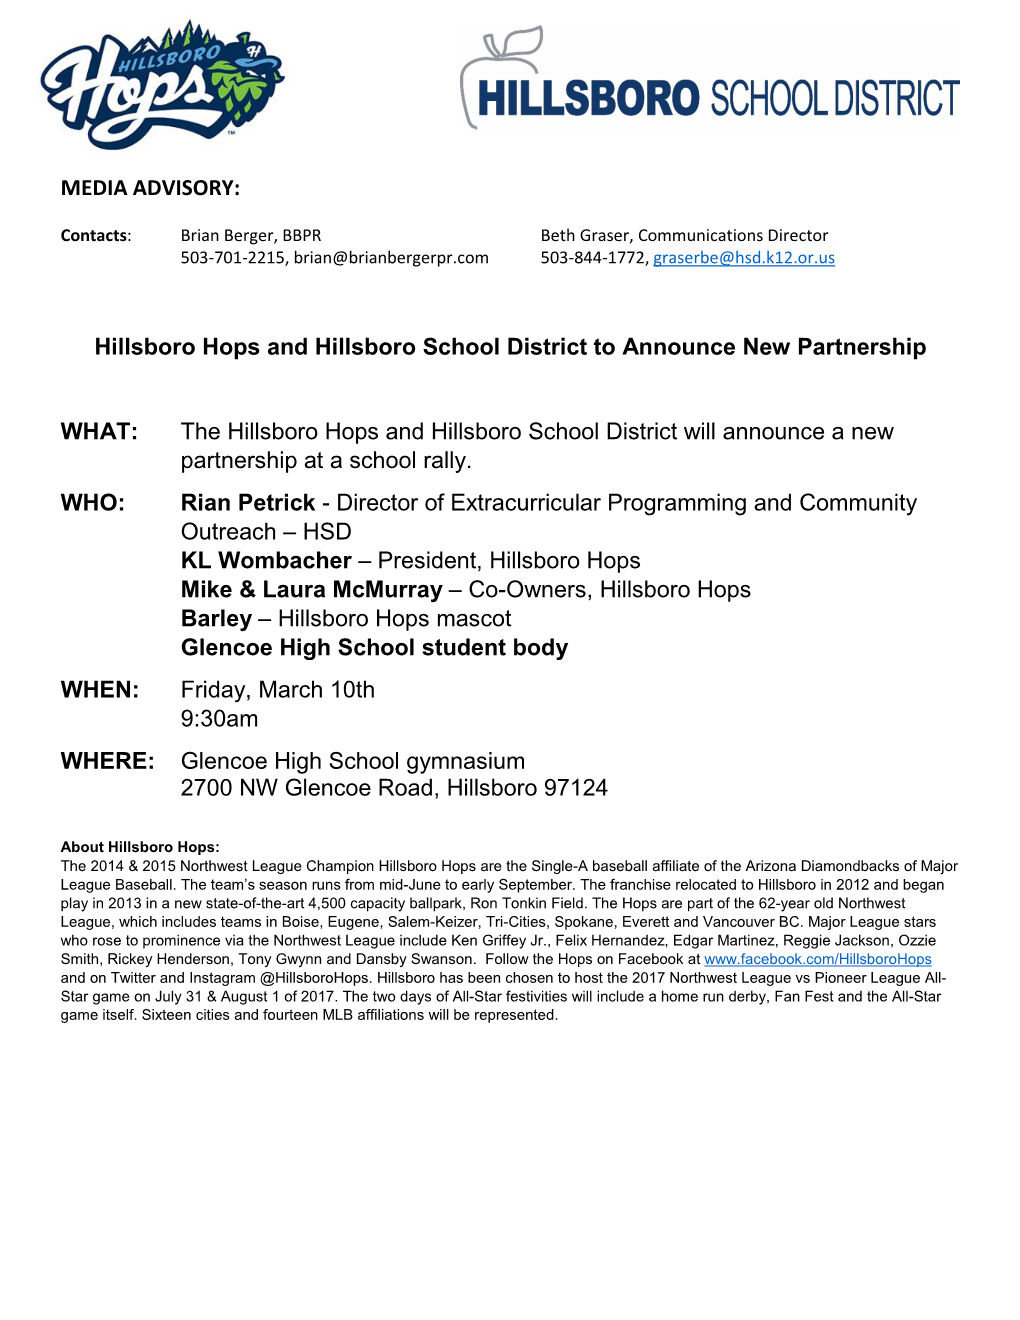 The Hillsboro Hops and Hillsboro School District Will Announce a New Partnership at a School Rally